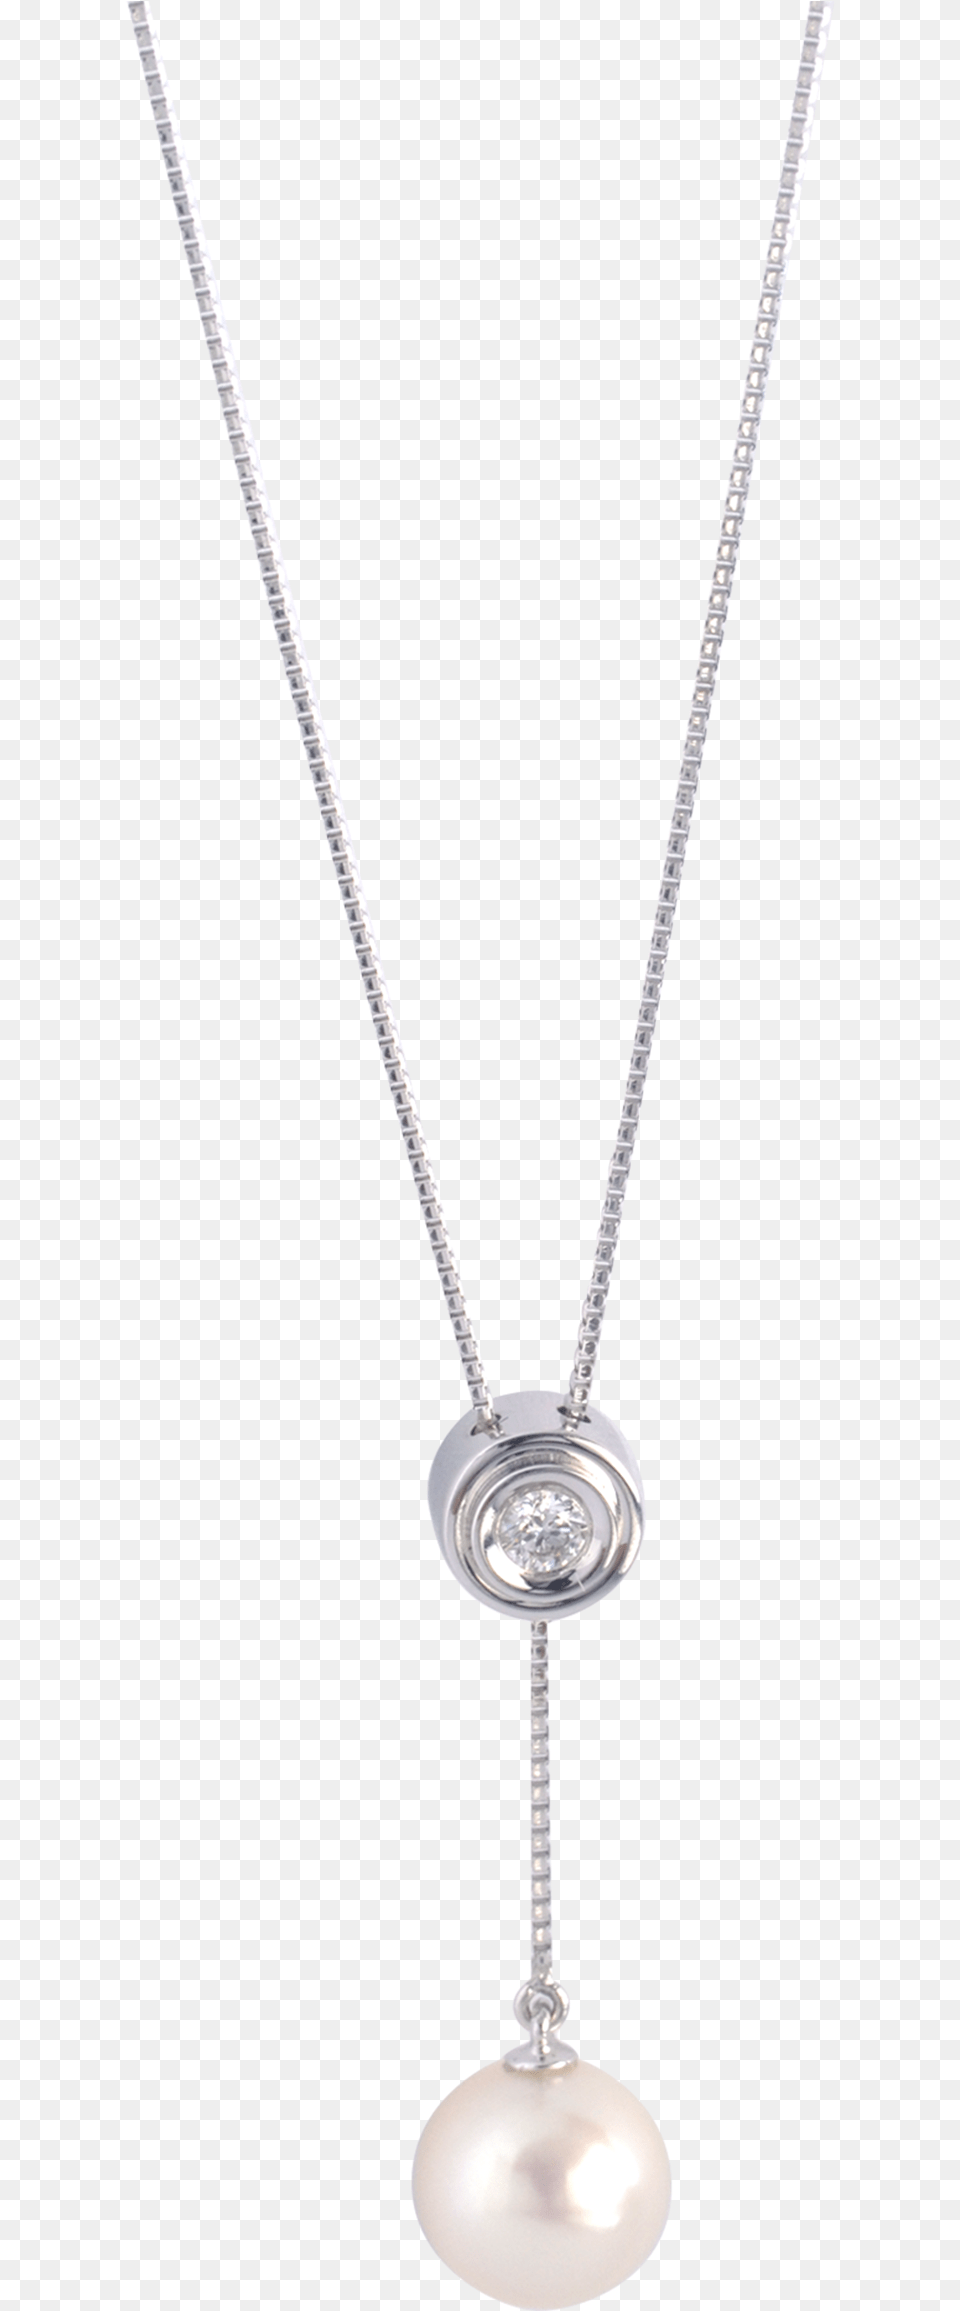 Locket, Accessories, Jewelry, Necklace, Pendant Png Image